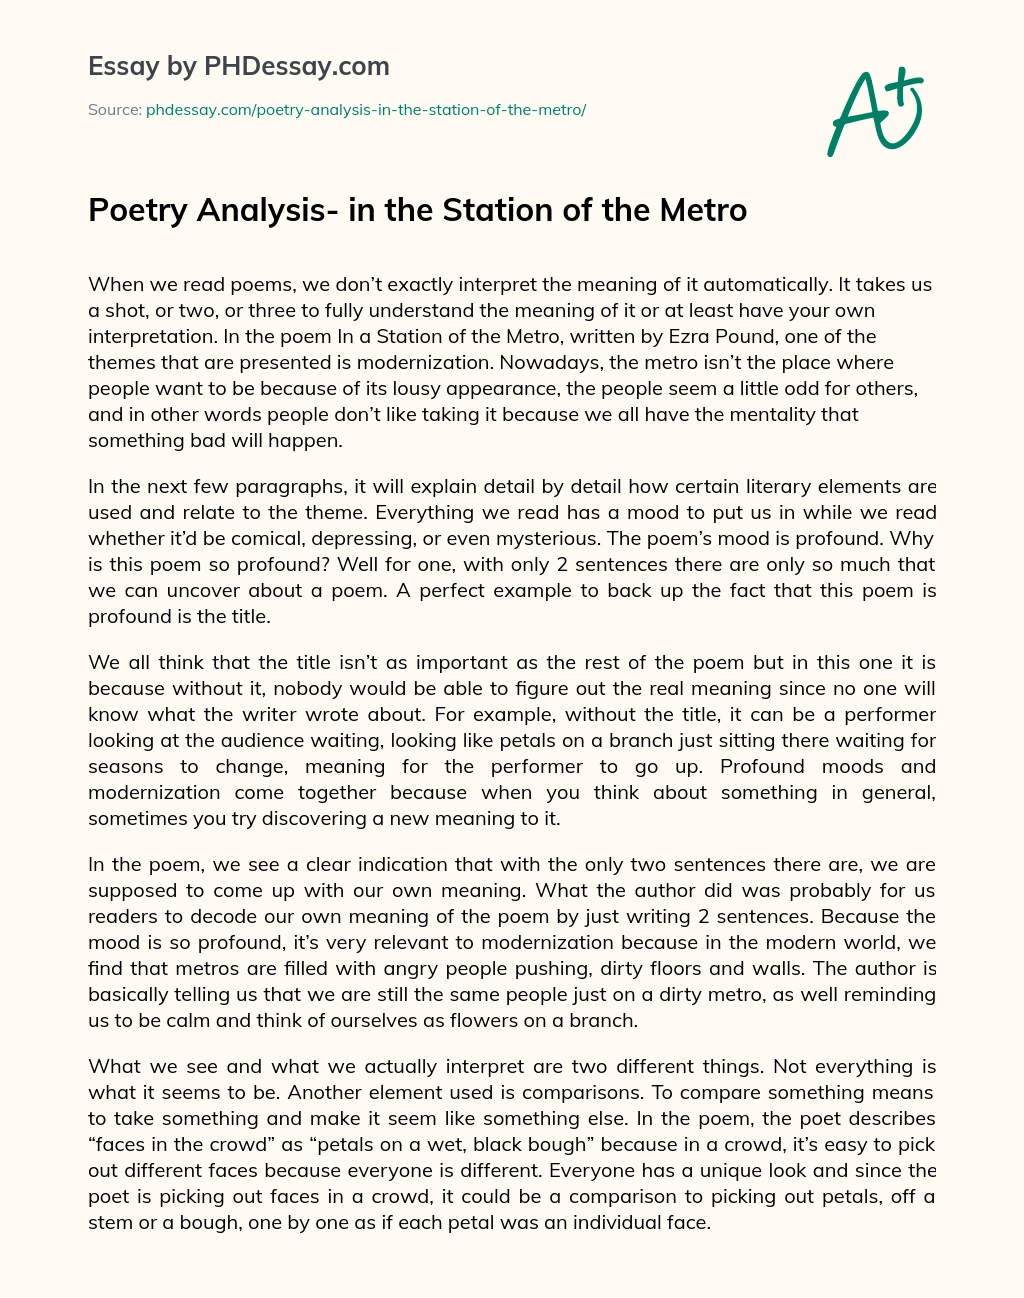 Poetry Analysis- in the Station of the Metro essay